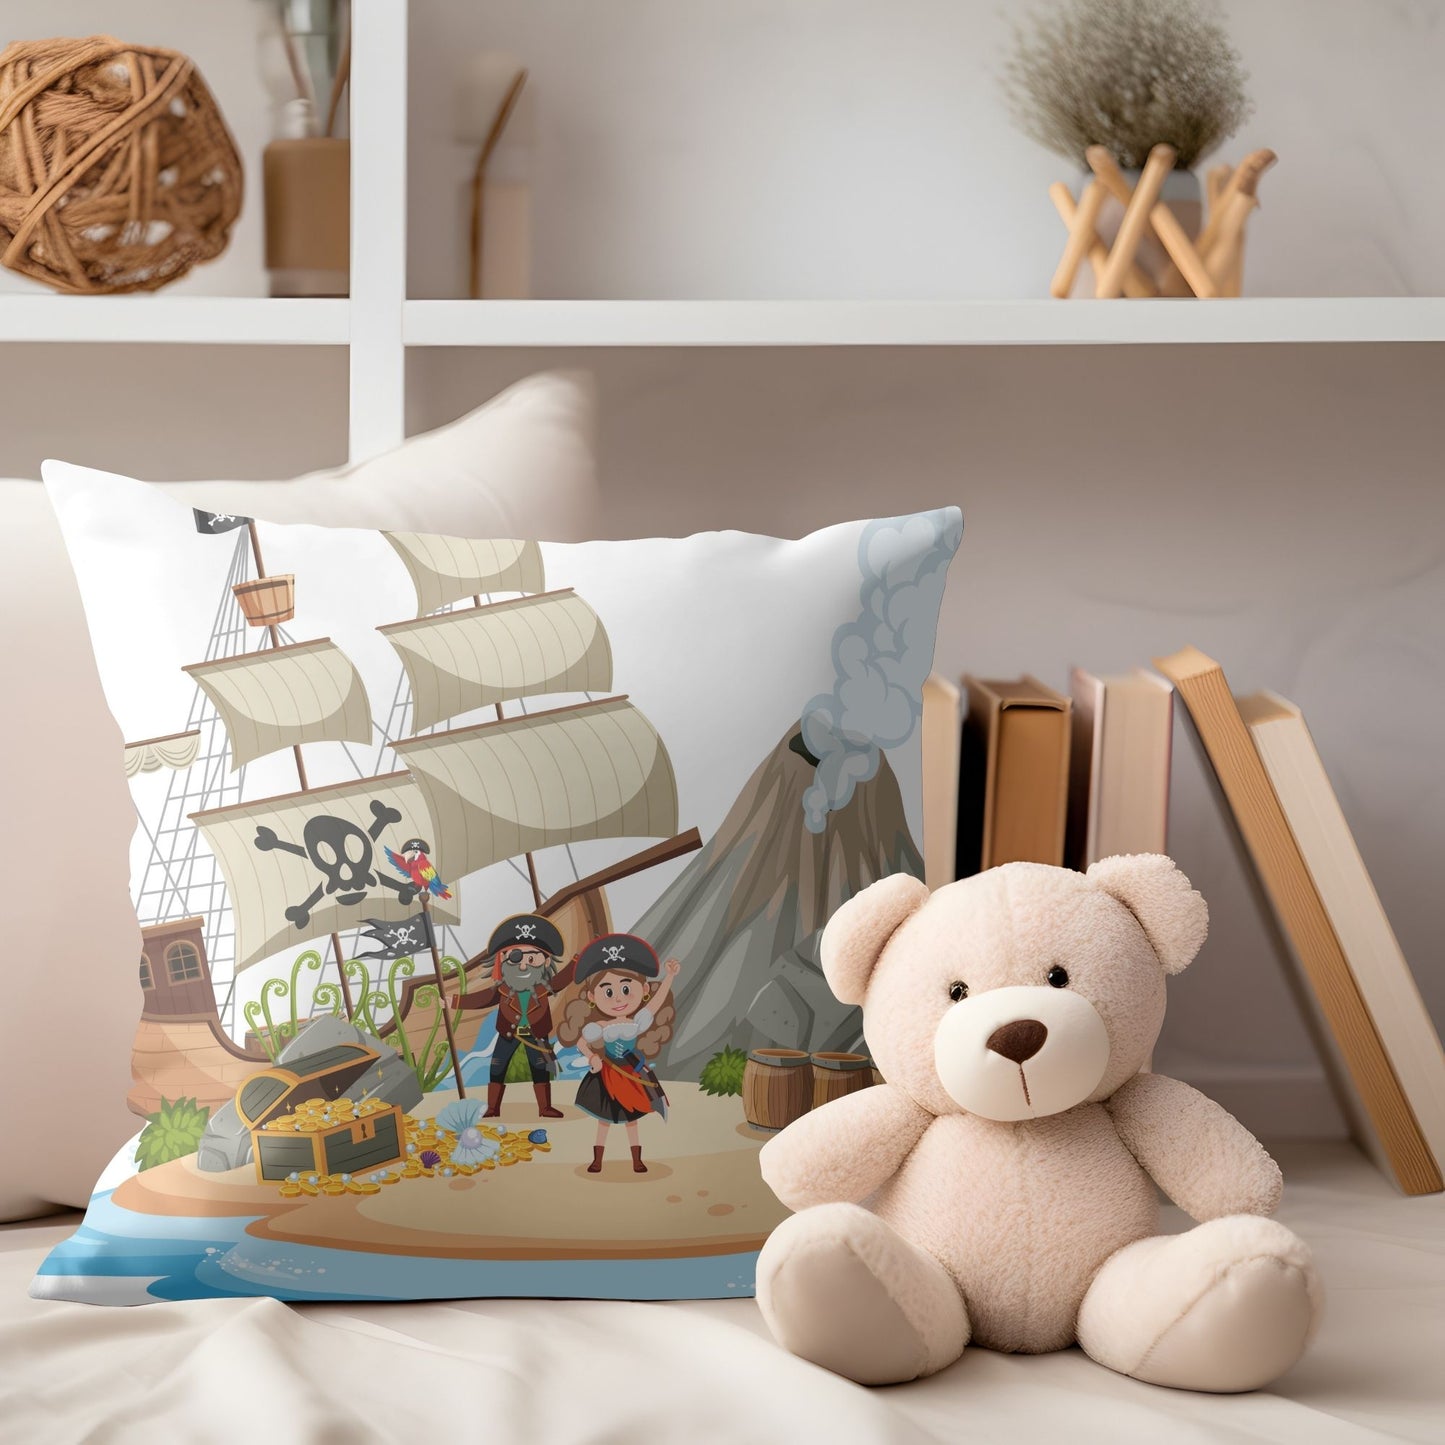 Soft pillow adorned with playful pirates on the island print.